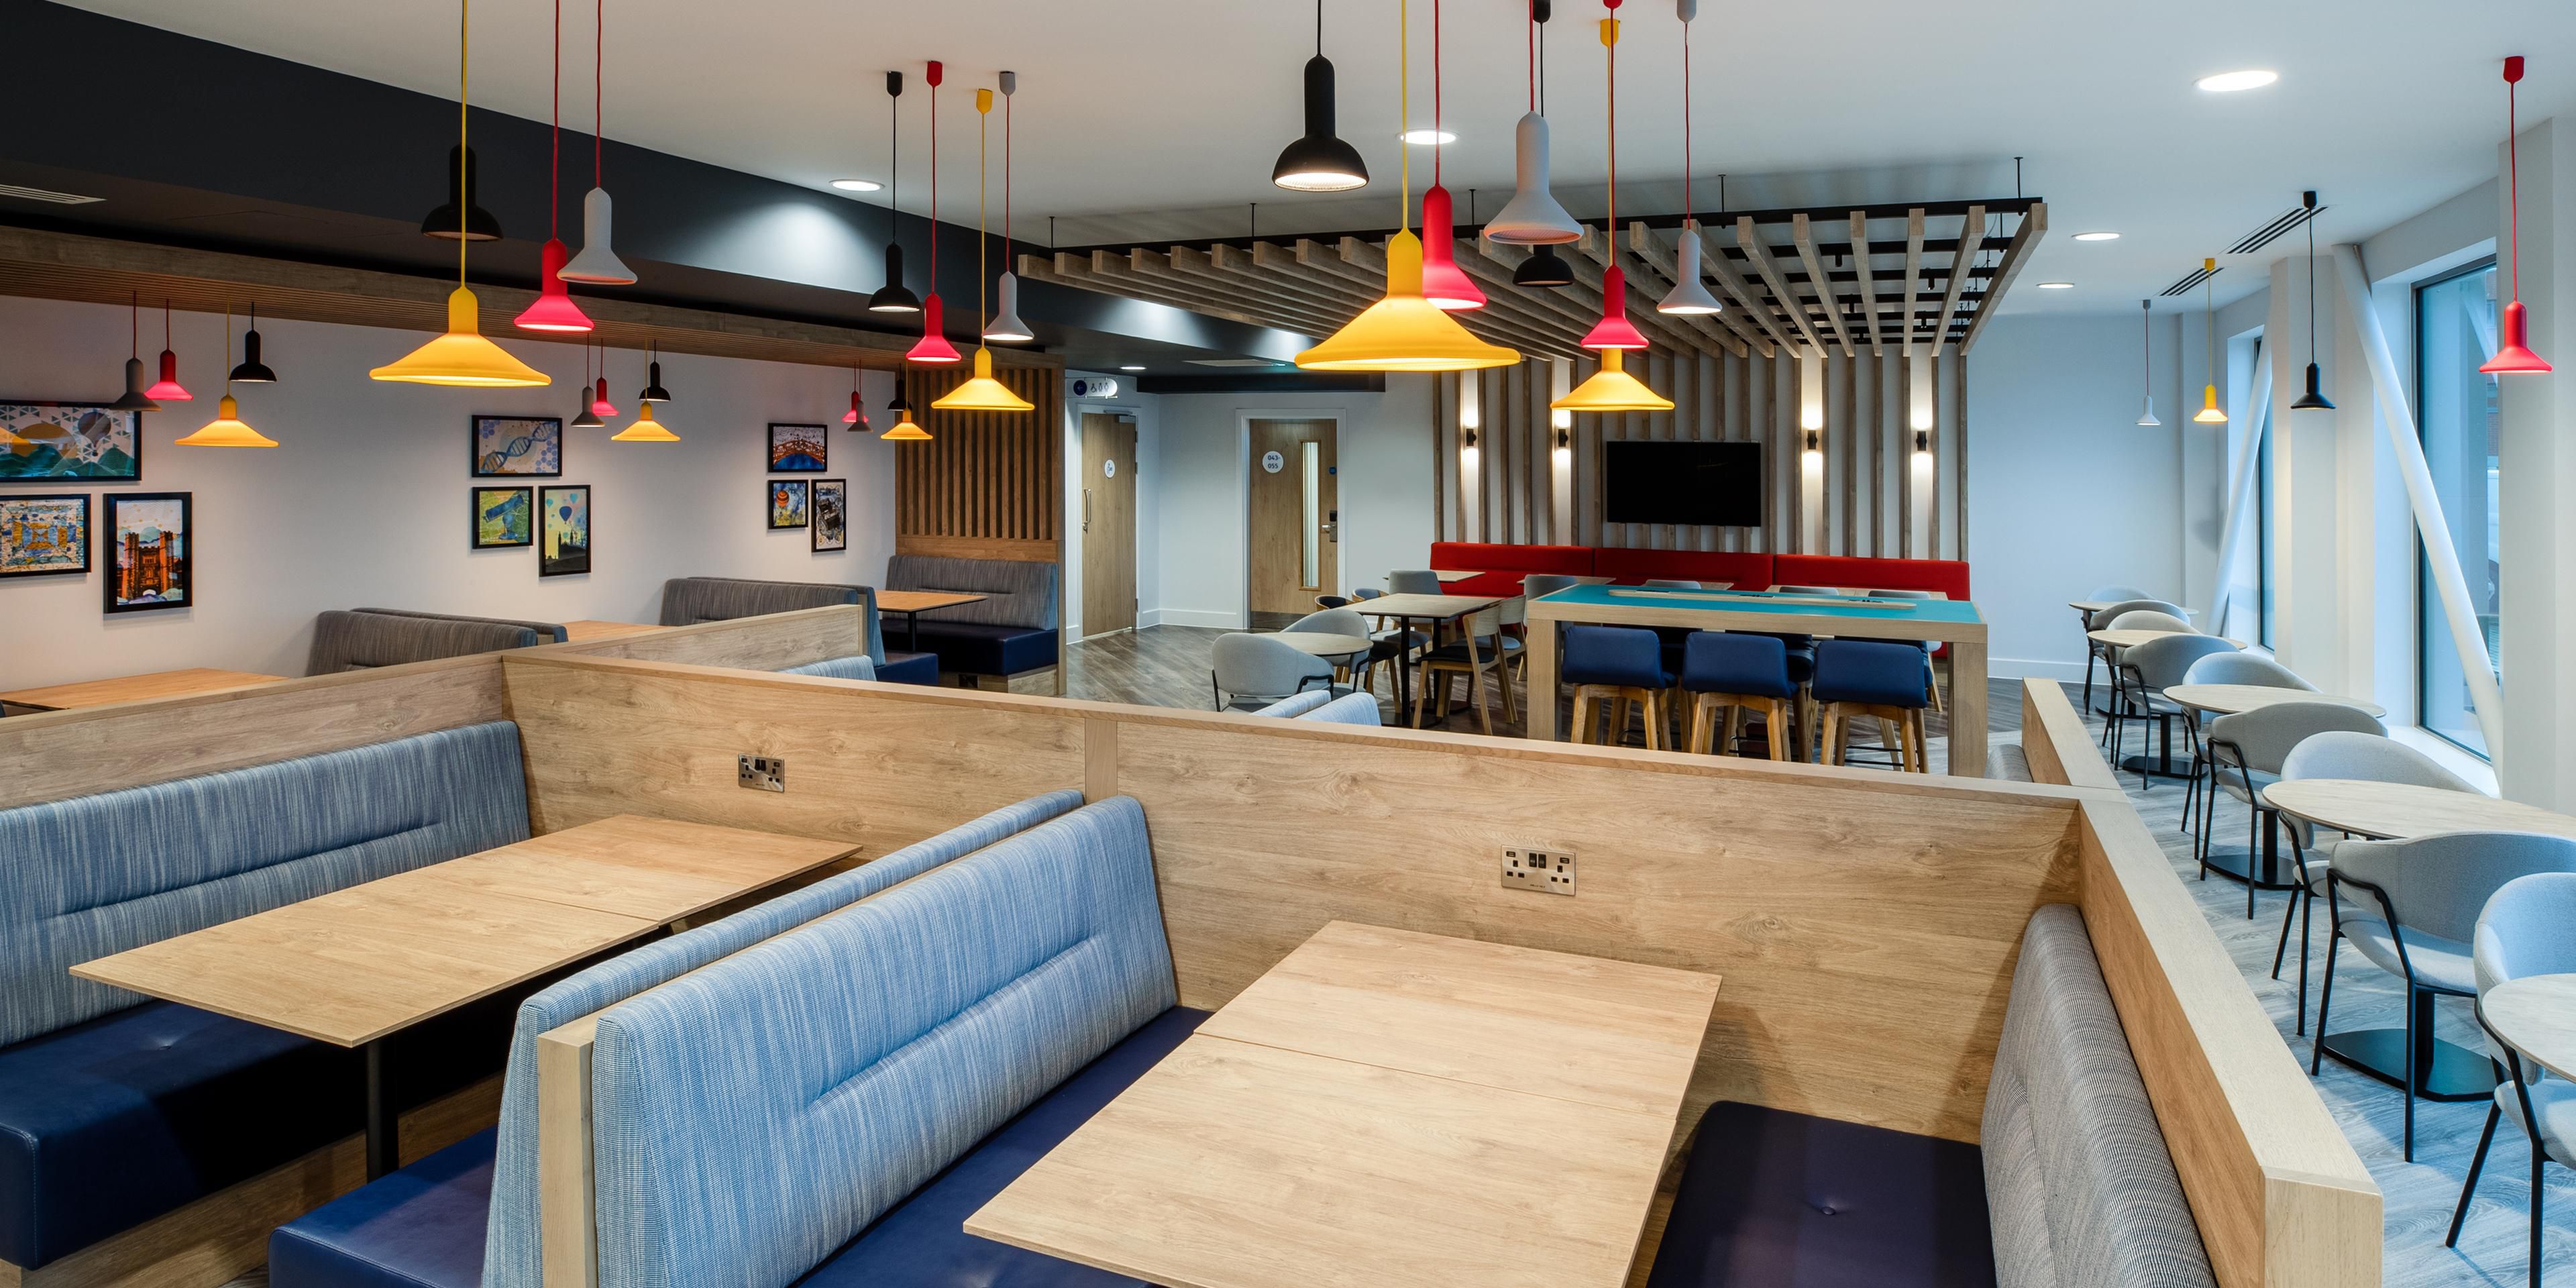 Fully stocked bar and restaurant serving delicious affordable dinner. Our open lobby is also an ideal space to meet or to use as a work space with free wifi.